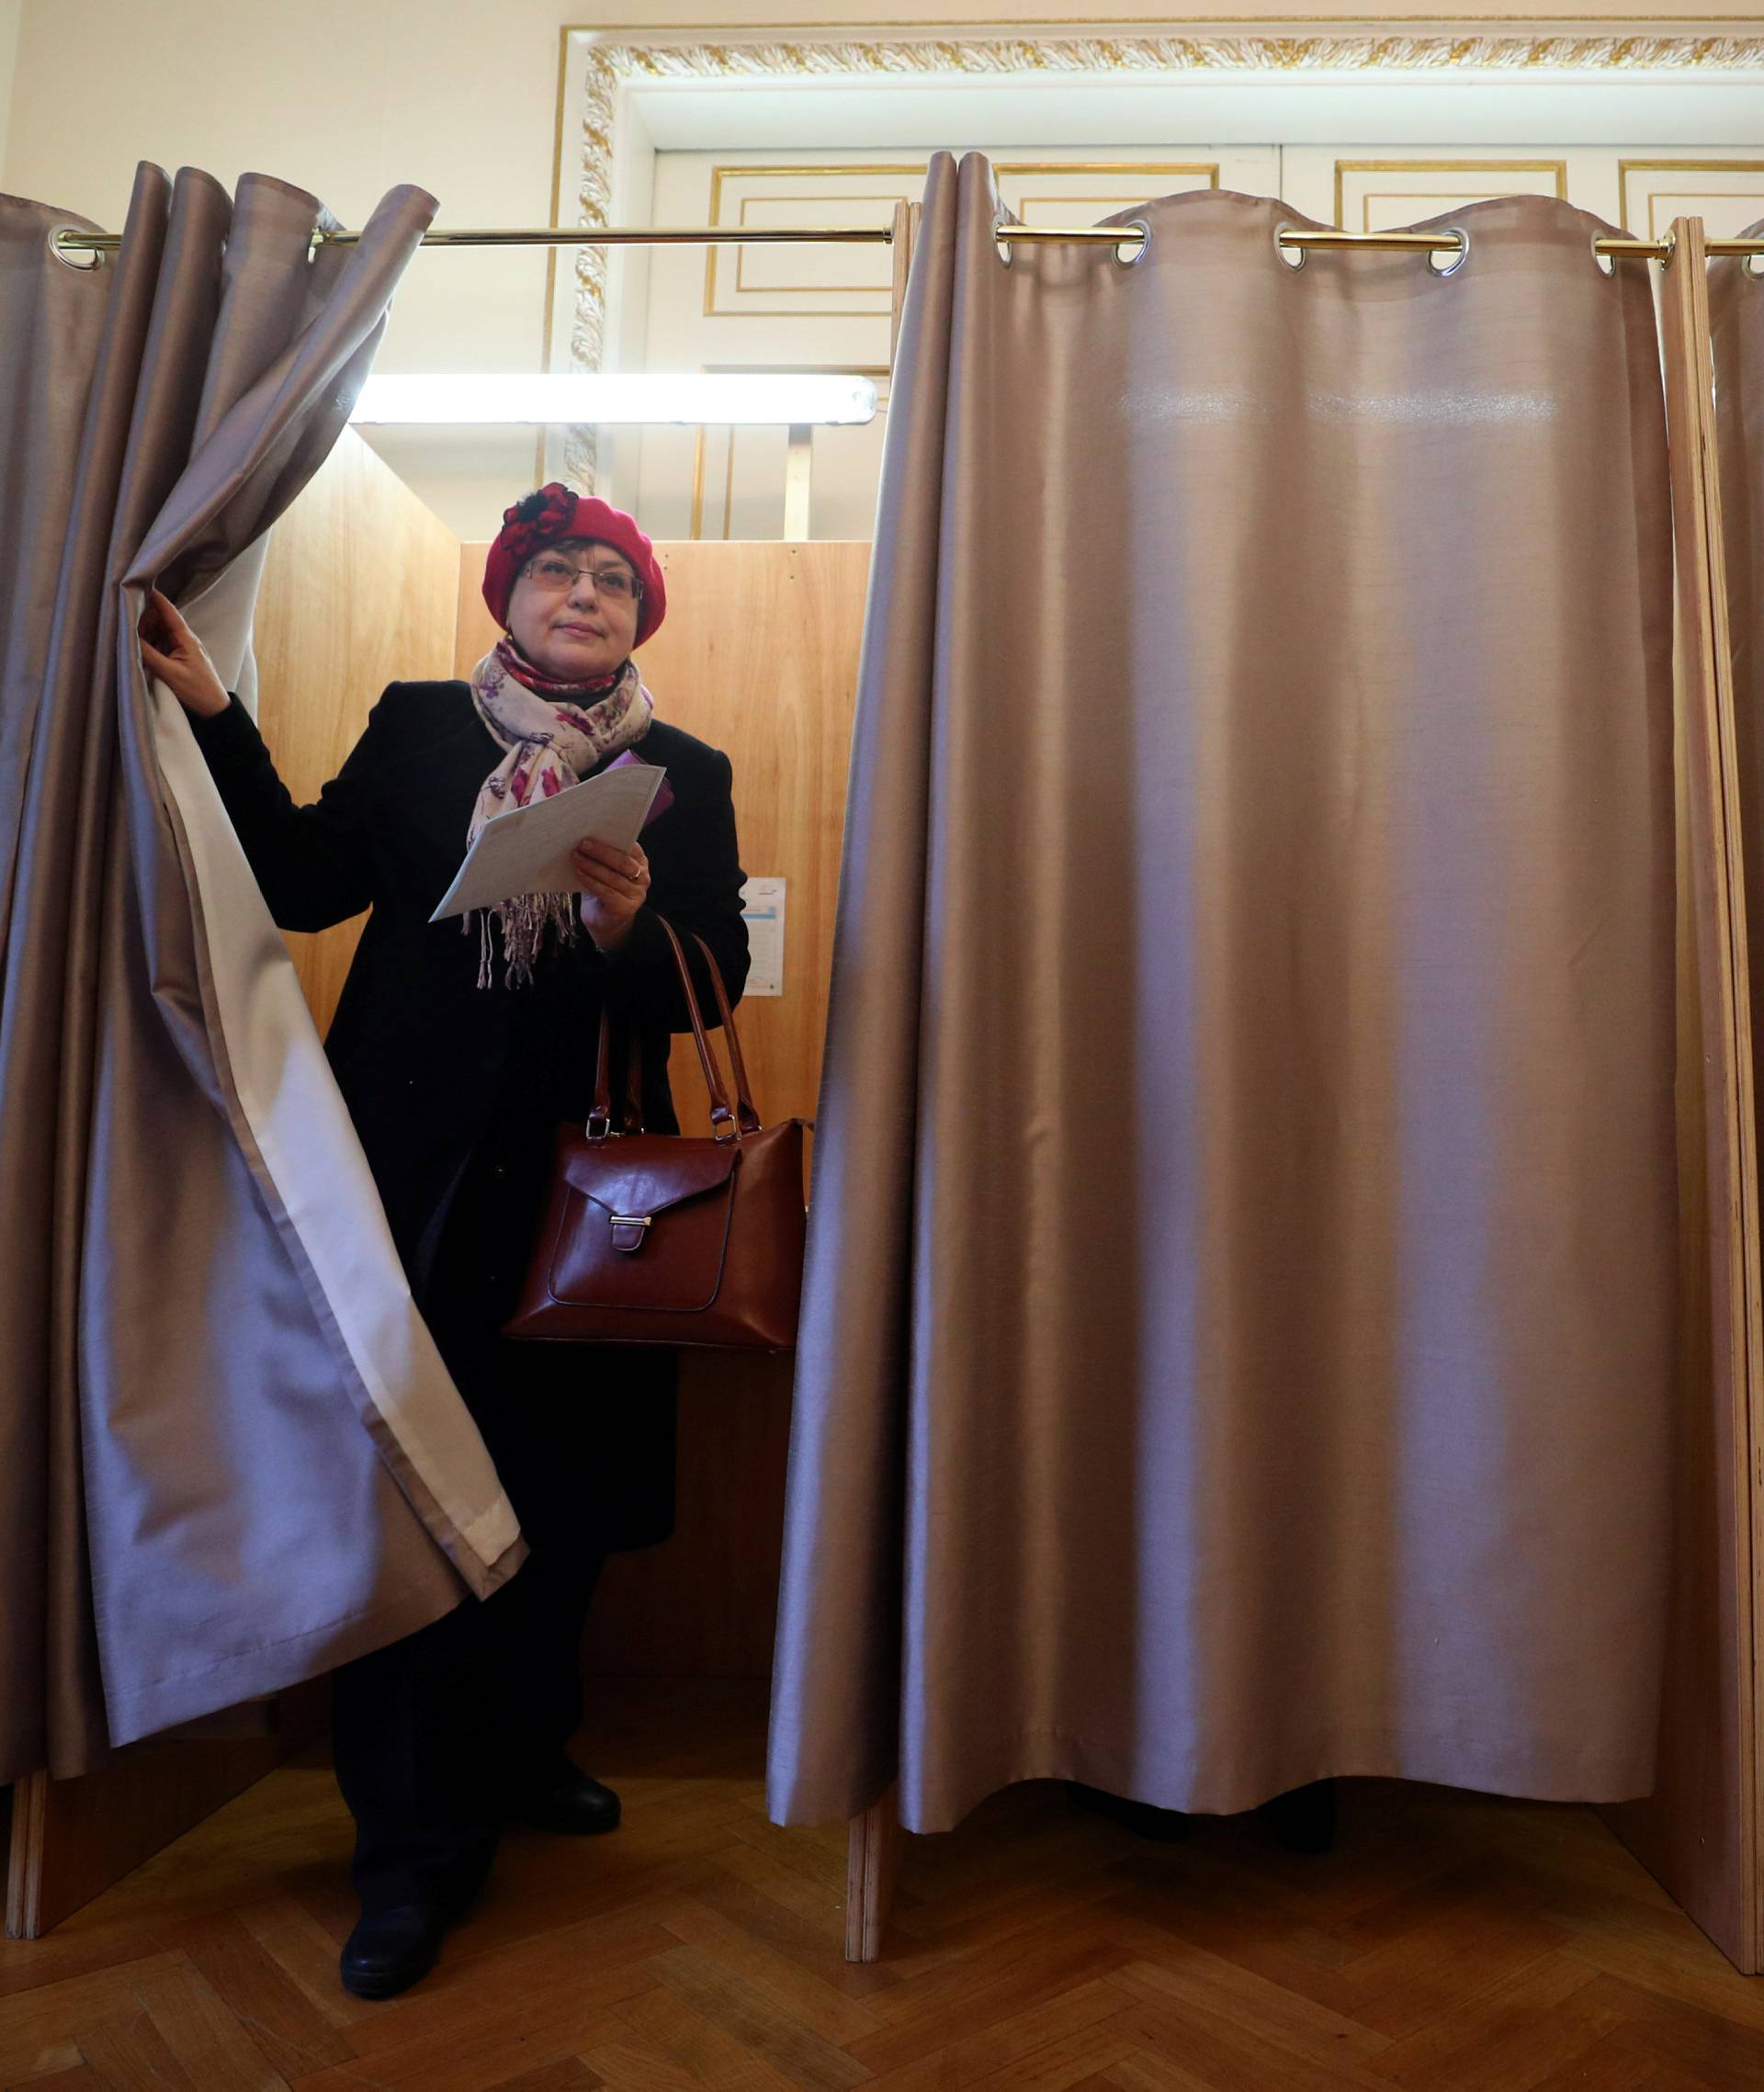 A woman walks out of a voting booth during the presidential election, inside the Russian Embassy in London